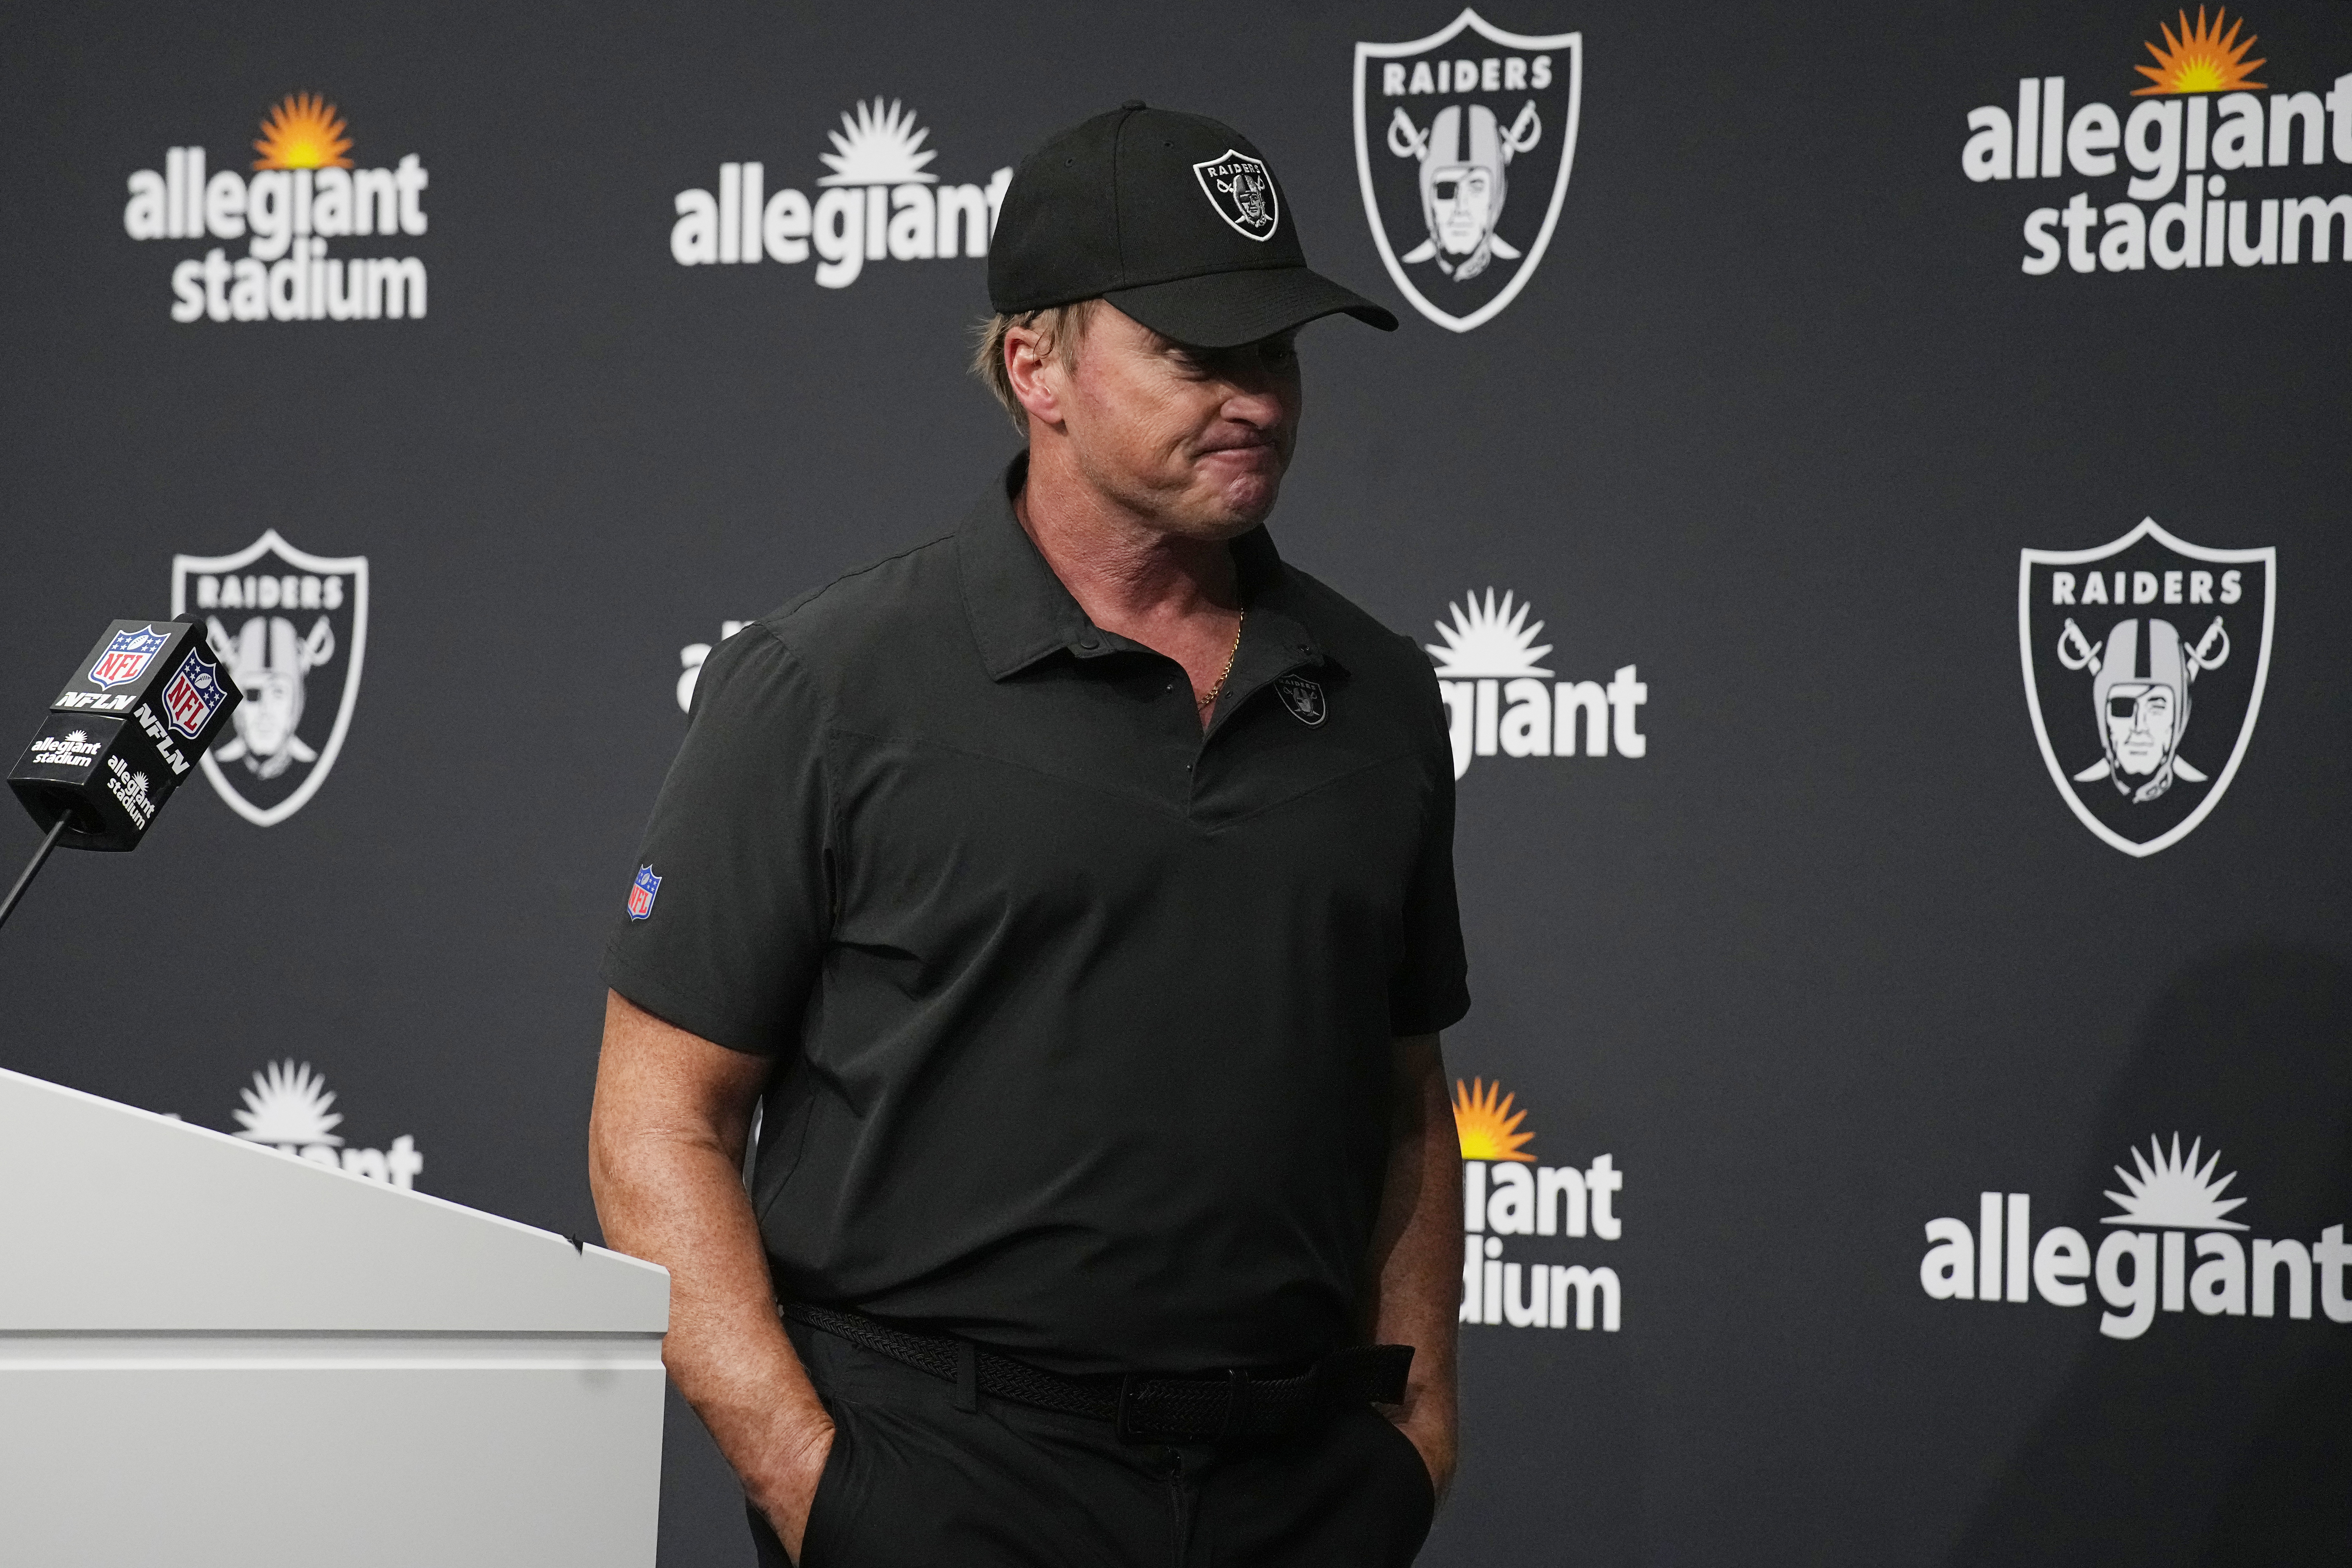 Fallout Continues From Gruden's Exit Over Emails — Which Won't Be Released, NFL Says